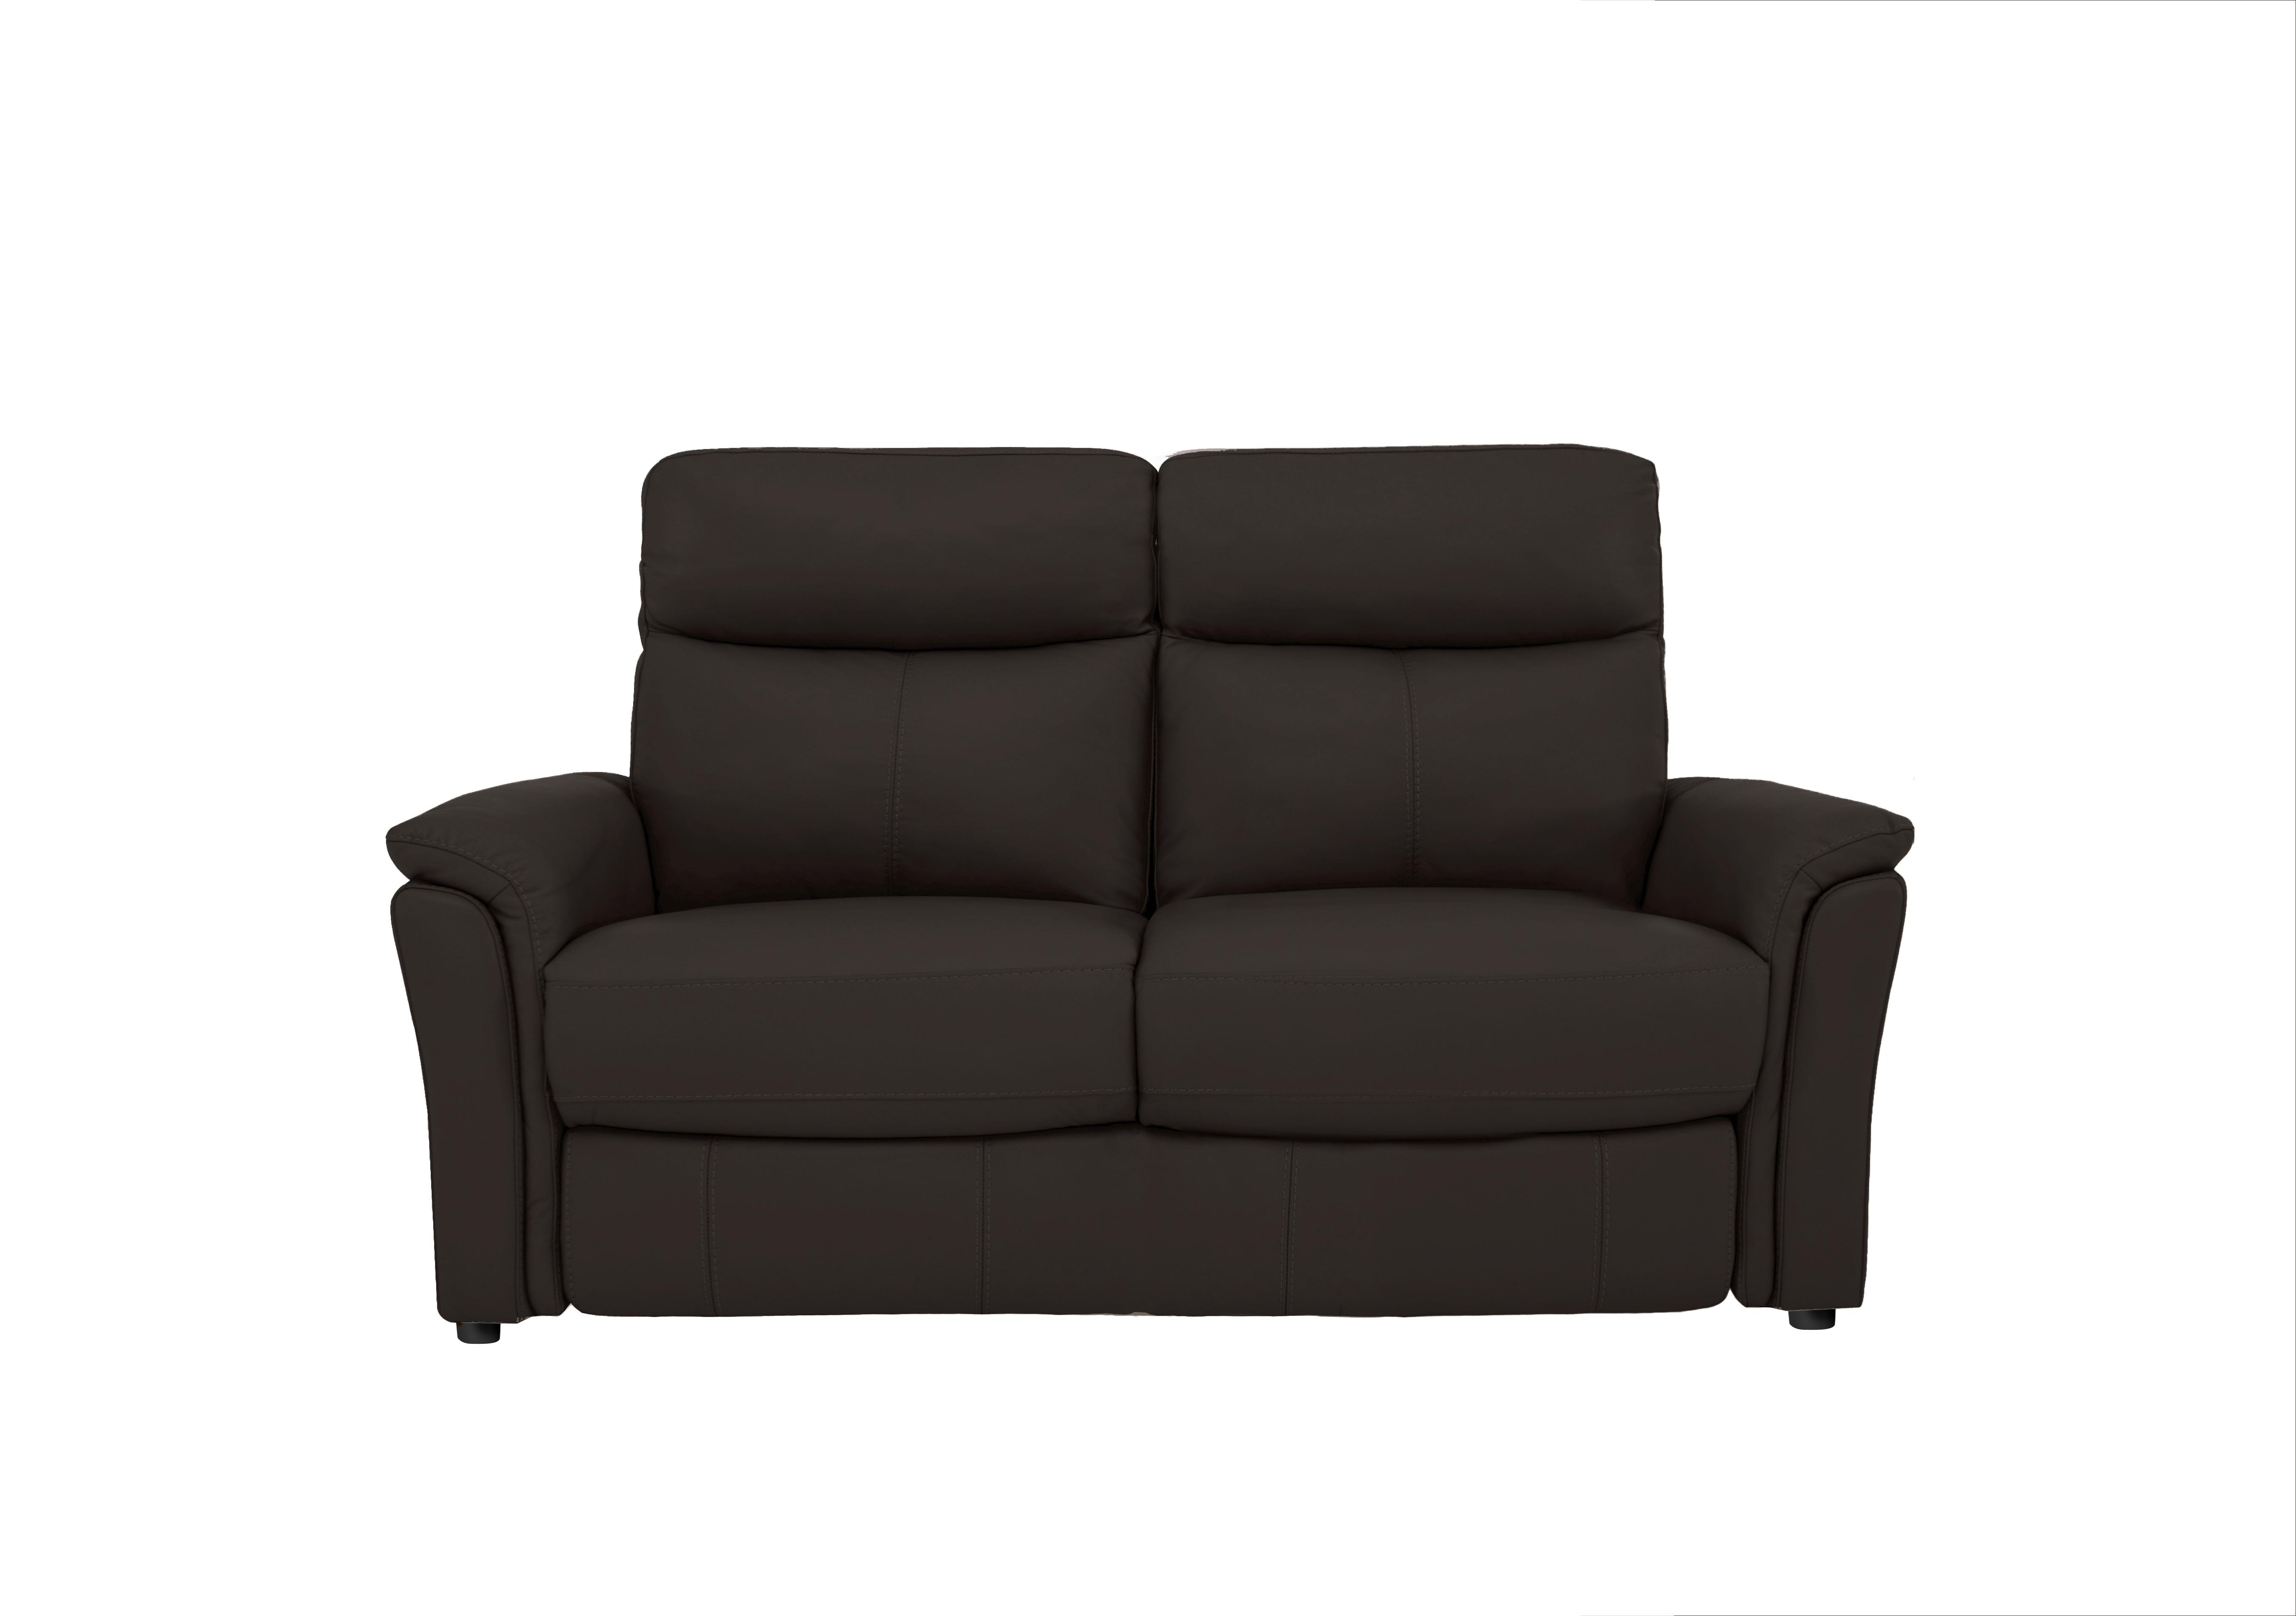 Compact Collection Piccolo 2 Seater Leather Static Sofa in Bv-1748 Dark Chocolate on Furniture Village